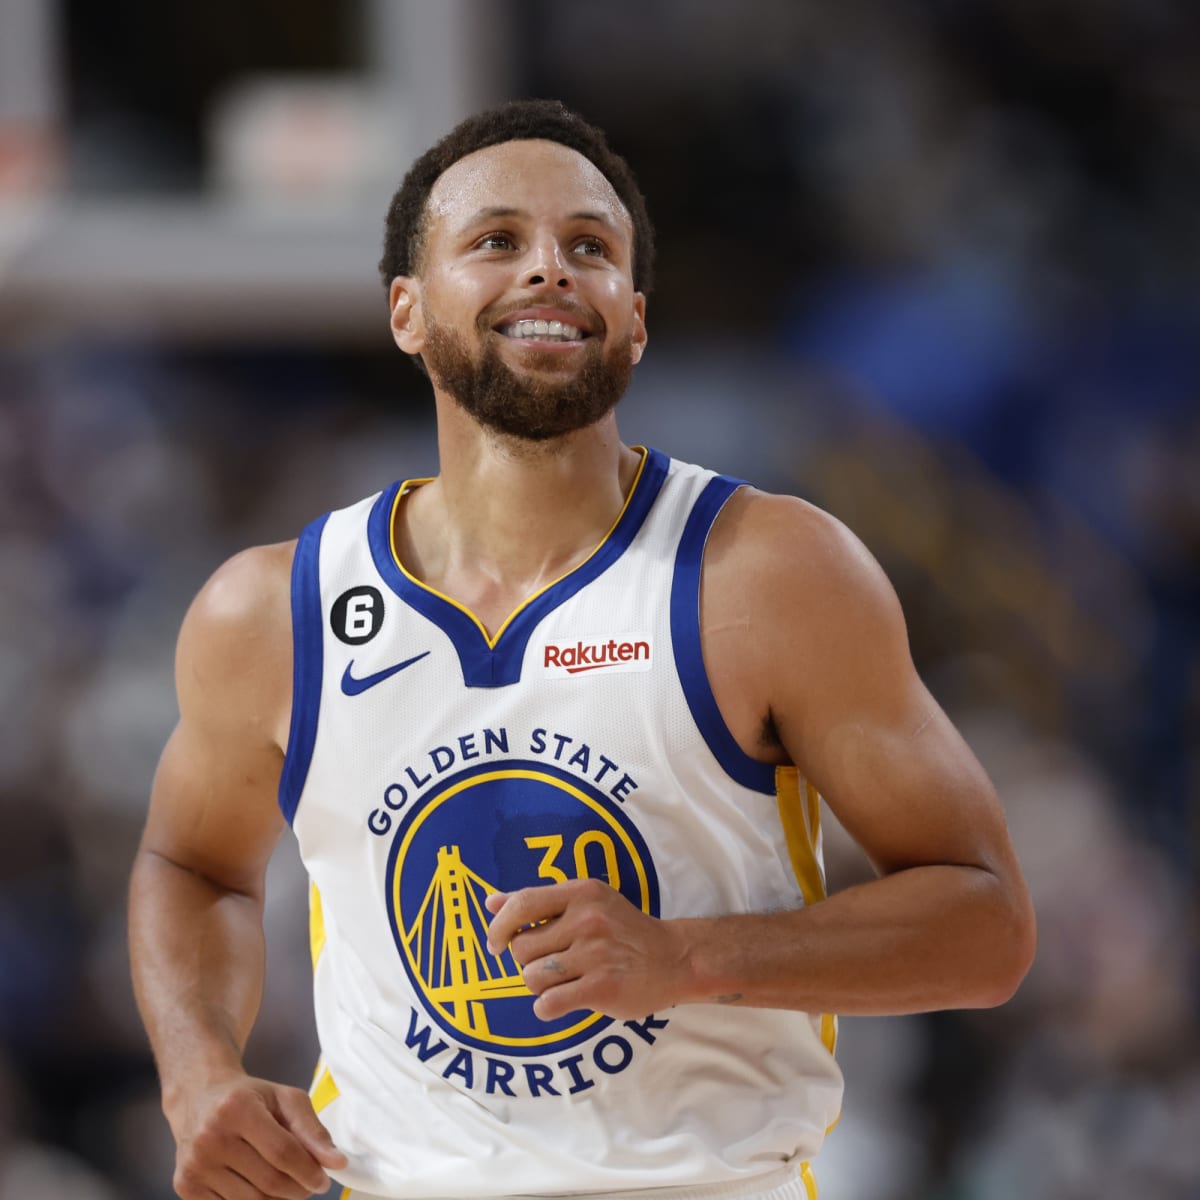 How long has Steph Curry been in the NBA? Top 5 seasons ranked